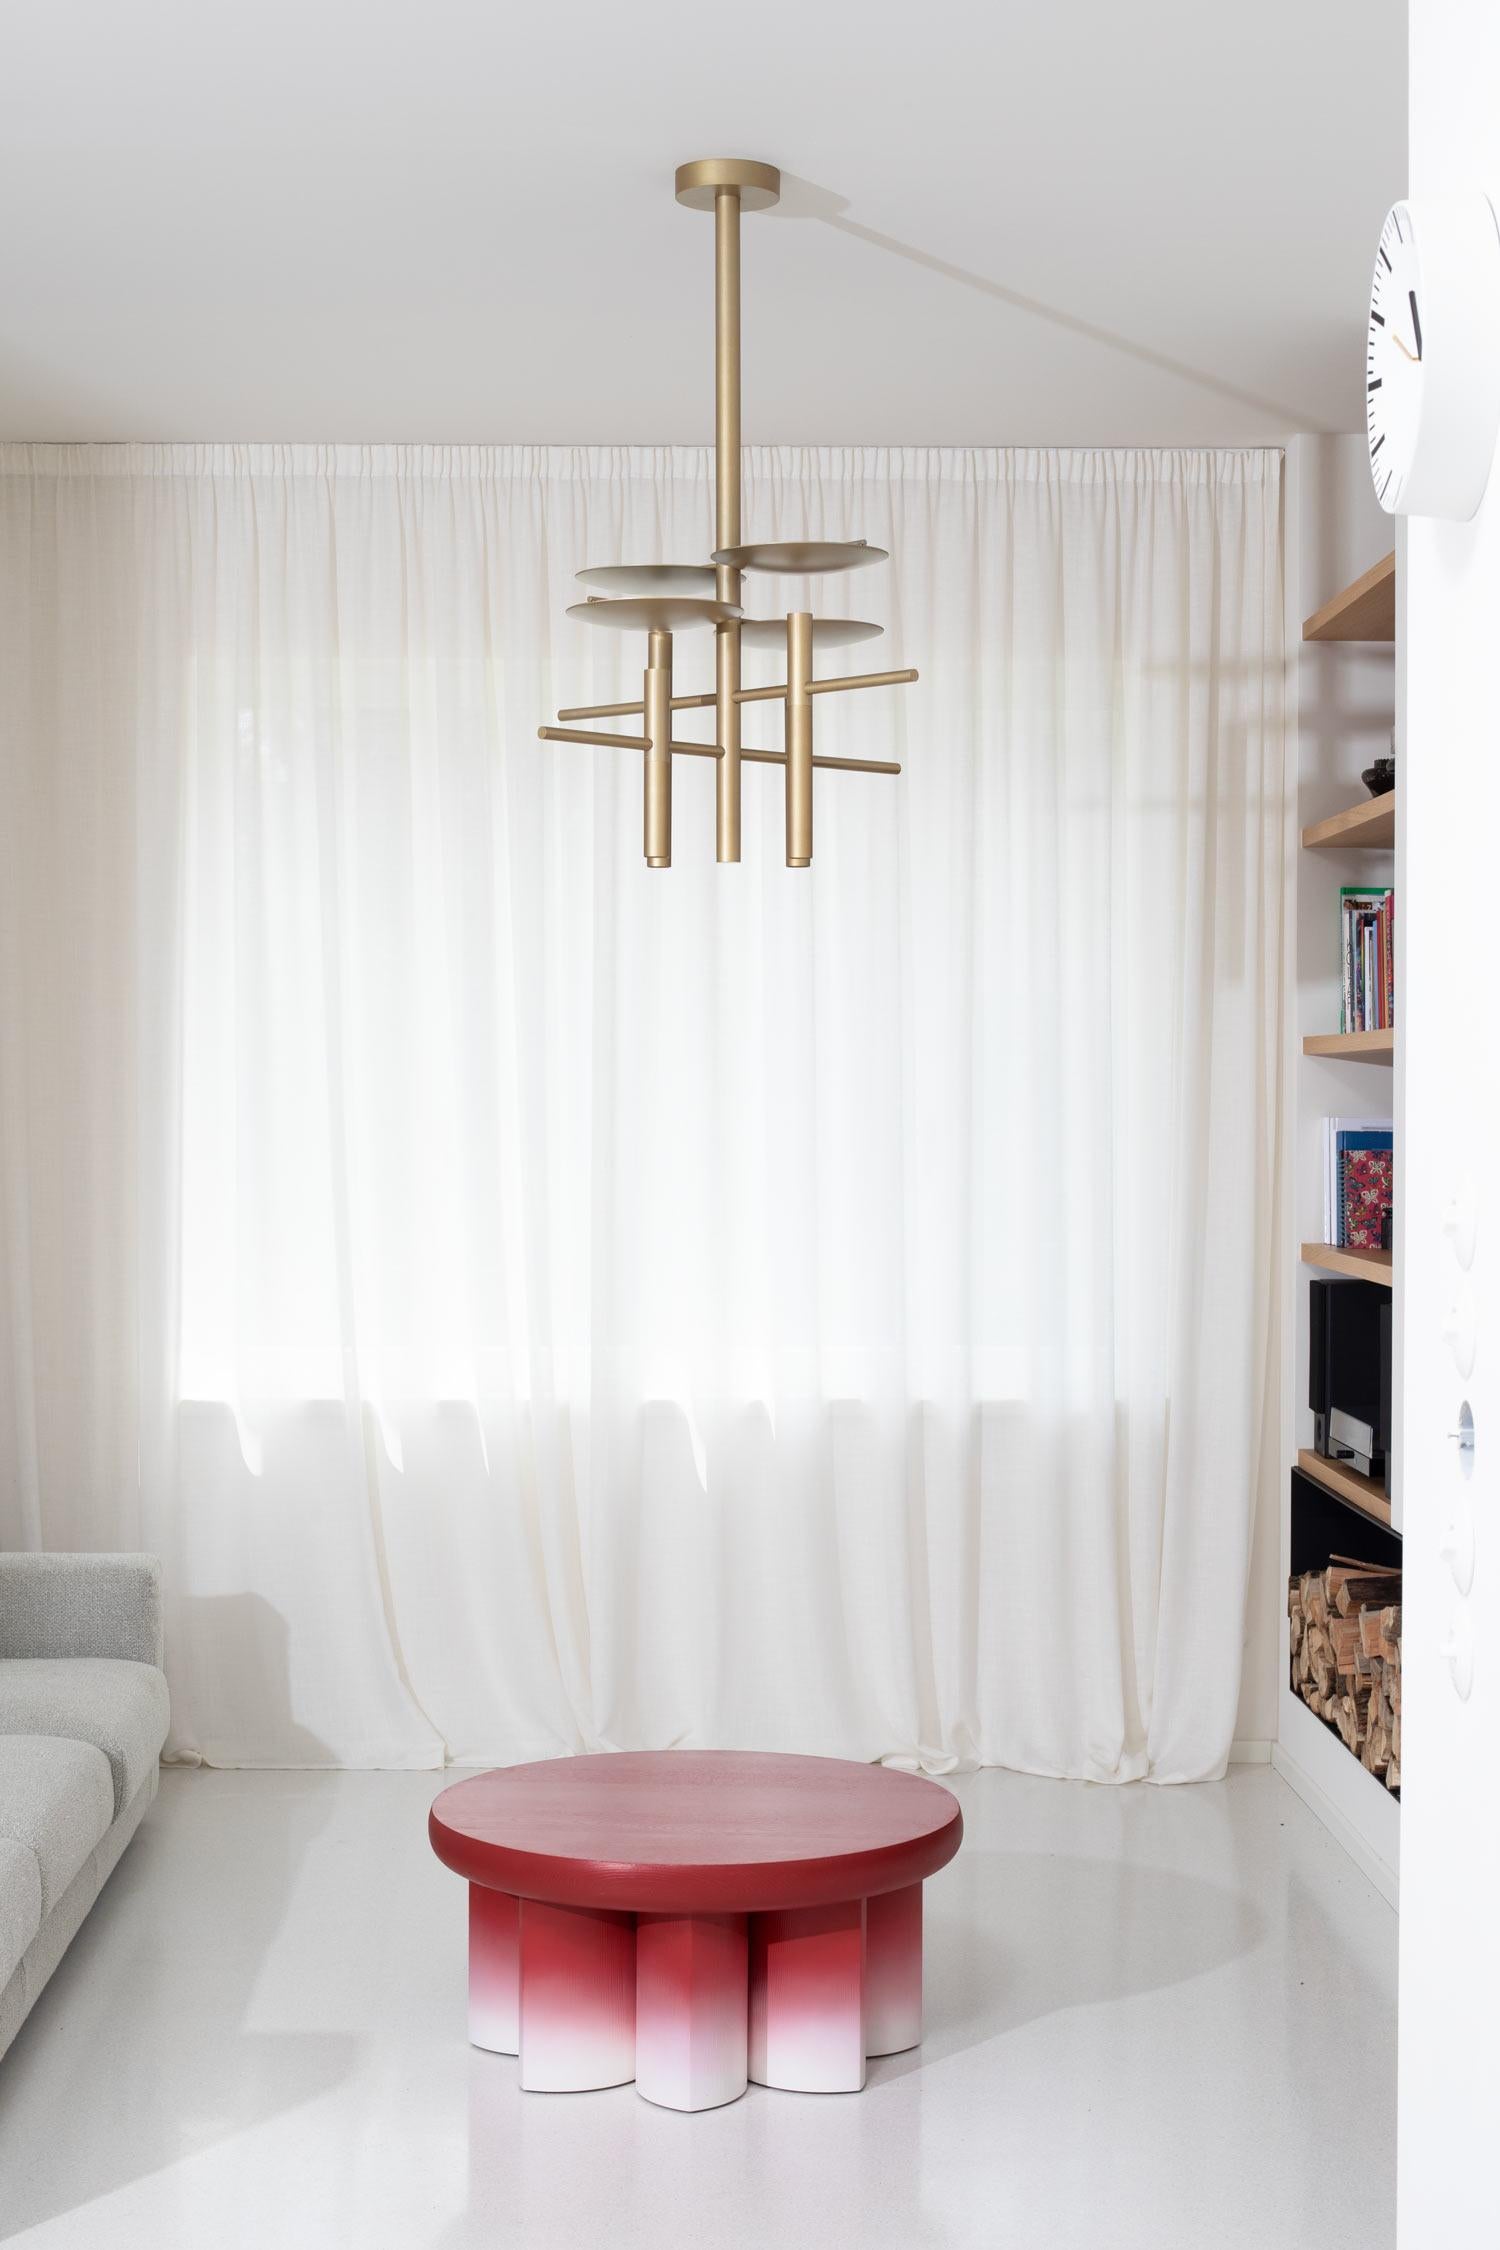 Lunae Luminaire / Chandelier Vertical I04 in Gold In New Condition For Sale In Prague 3, Vinohrady